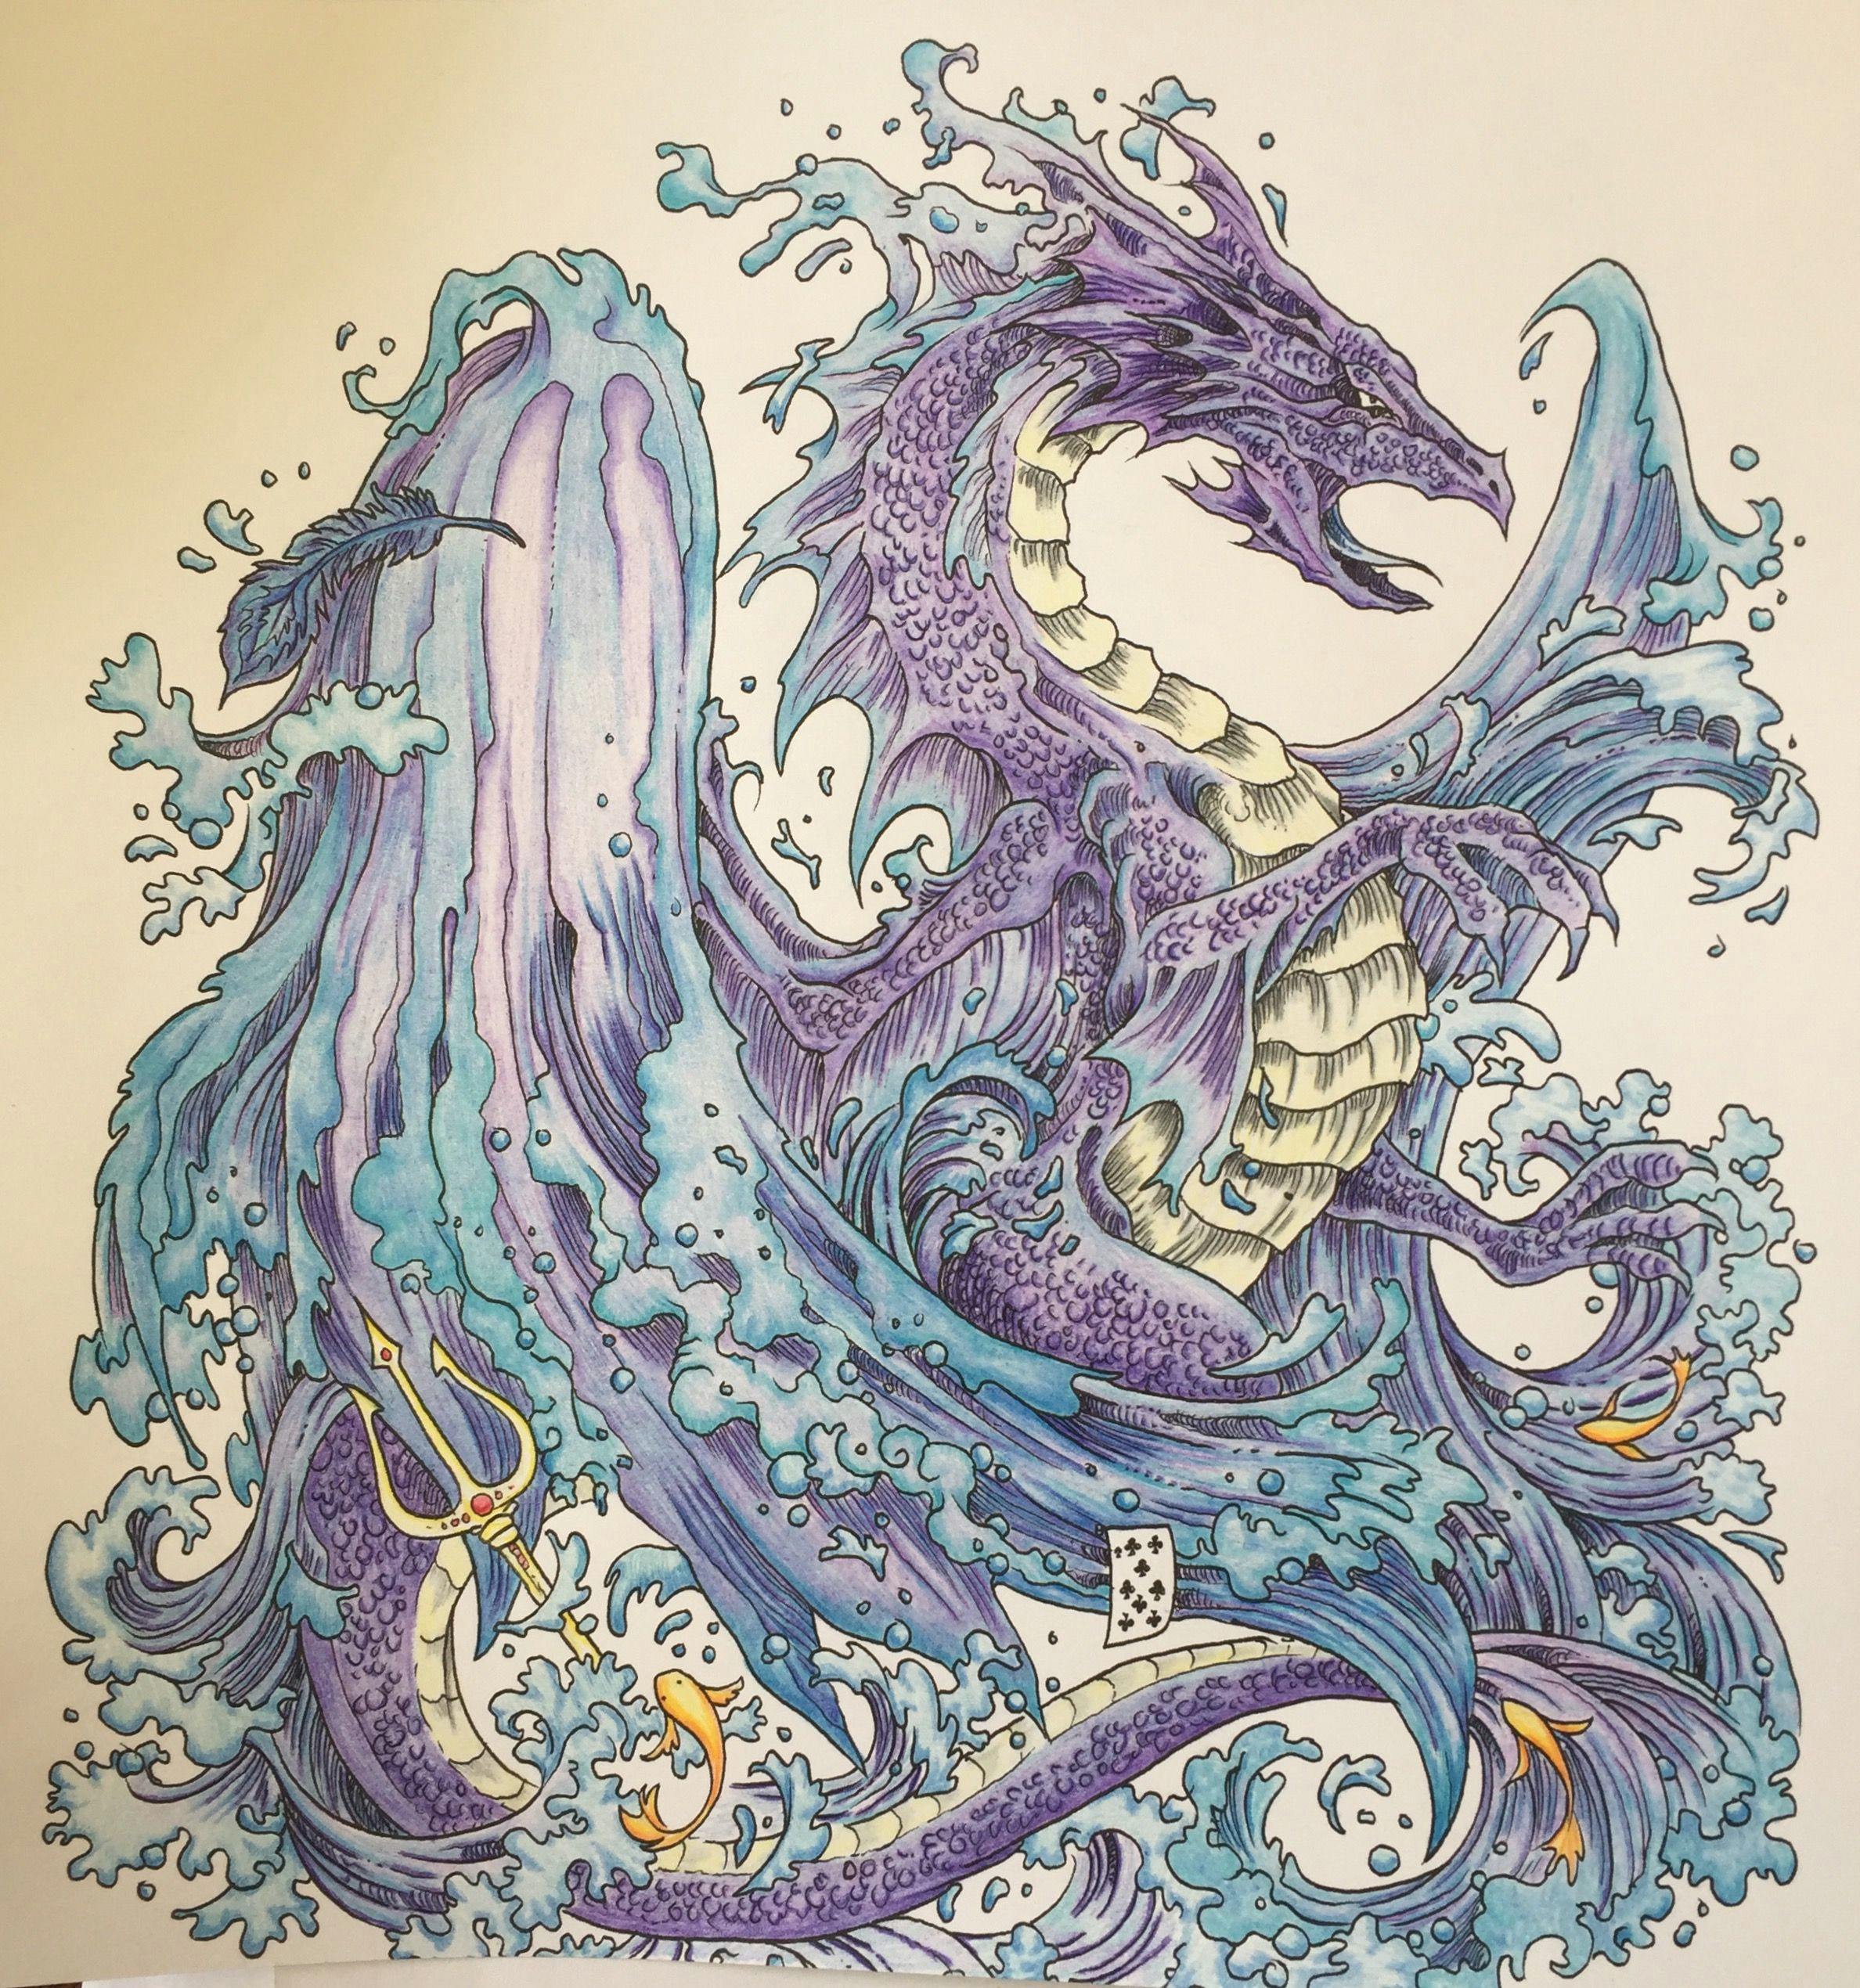 Colored Pencil Drawings Of Dragons Water Dragon From Mythomorphia by Kerbyrosanes Adult Coloring